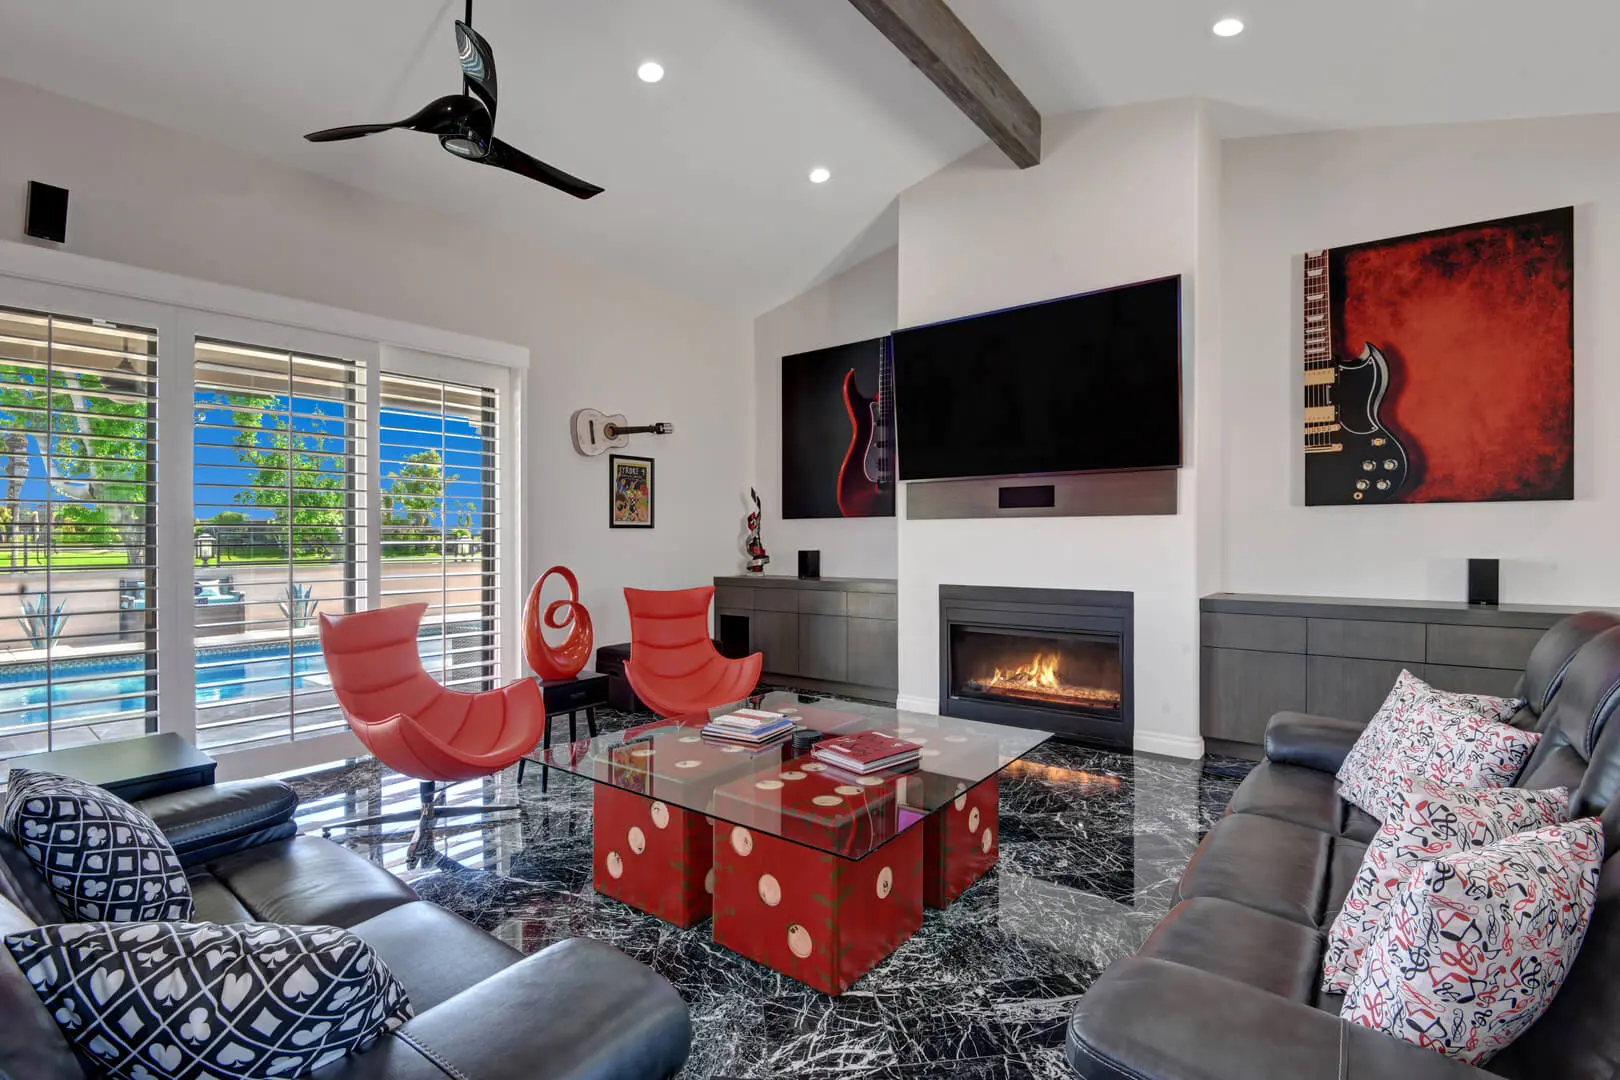 A living room with a fire place and red chairs